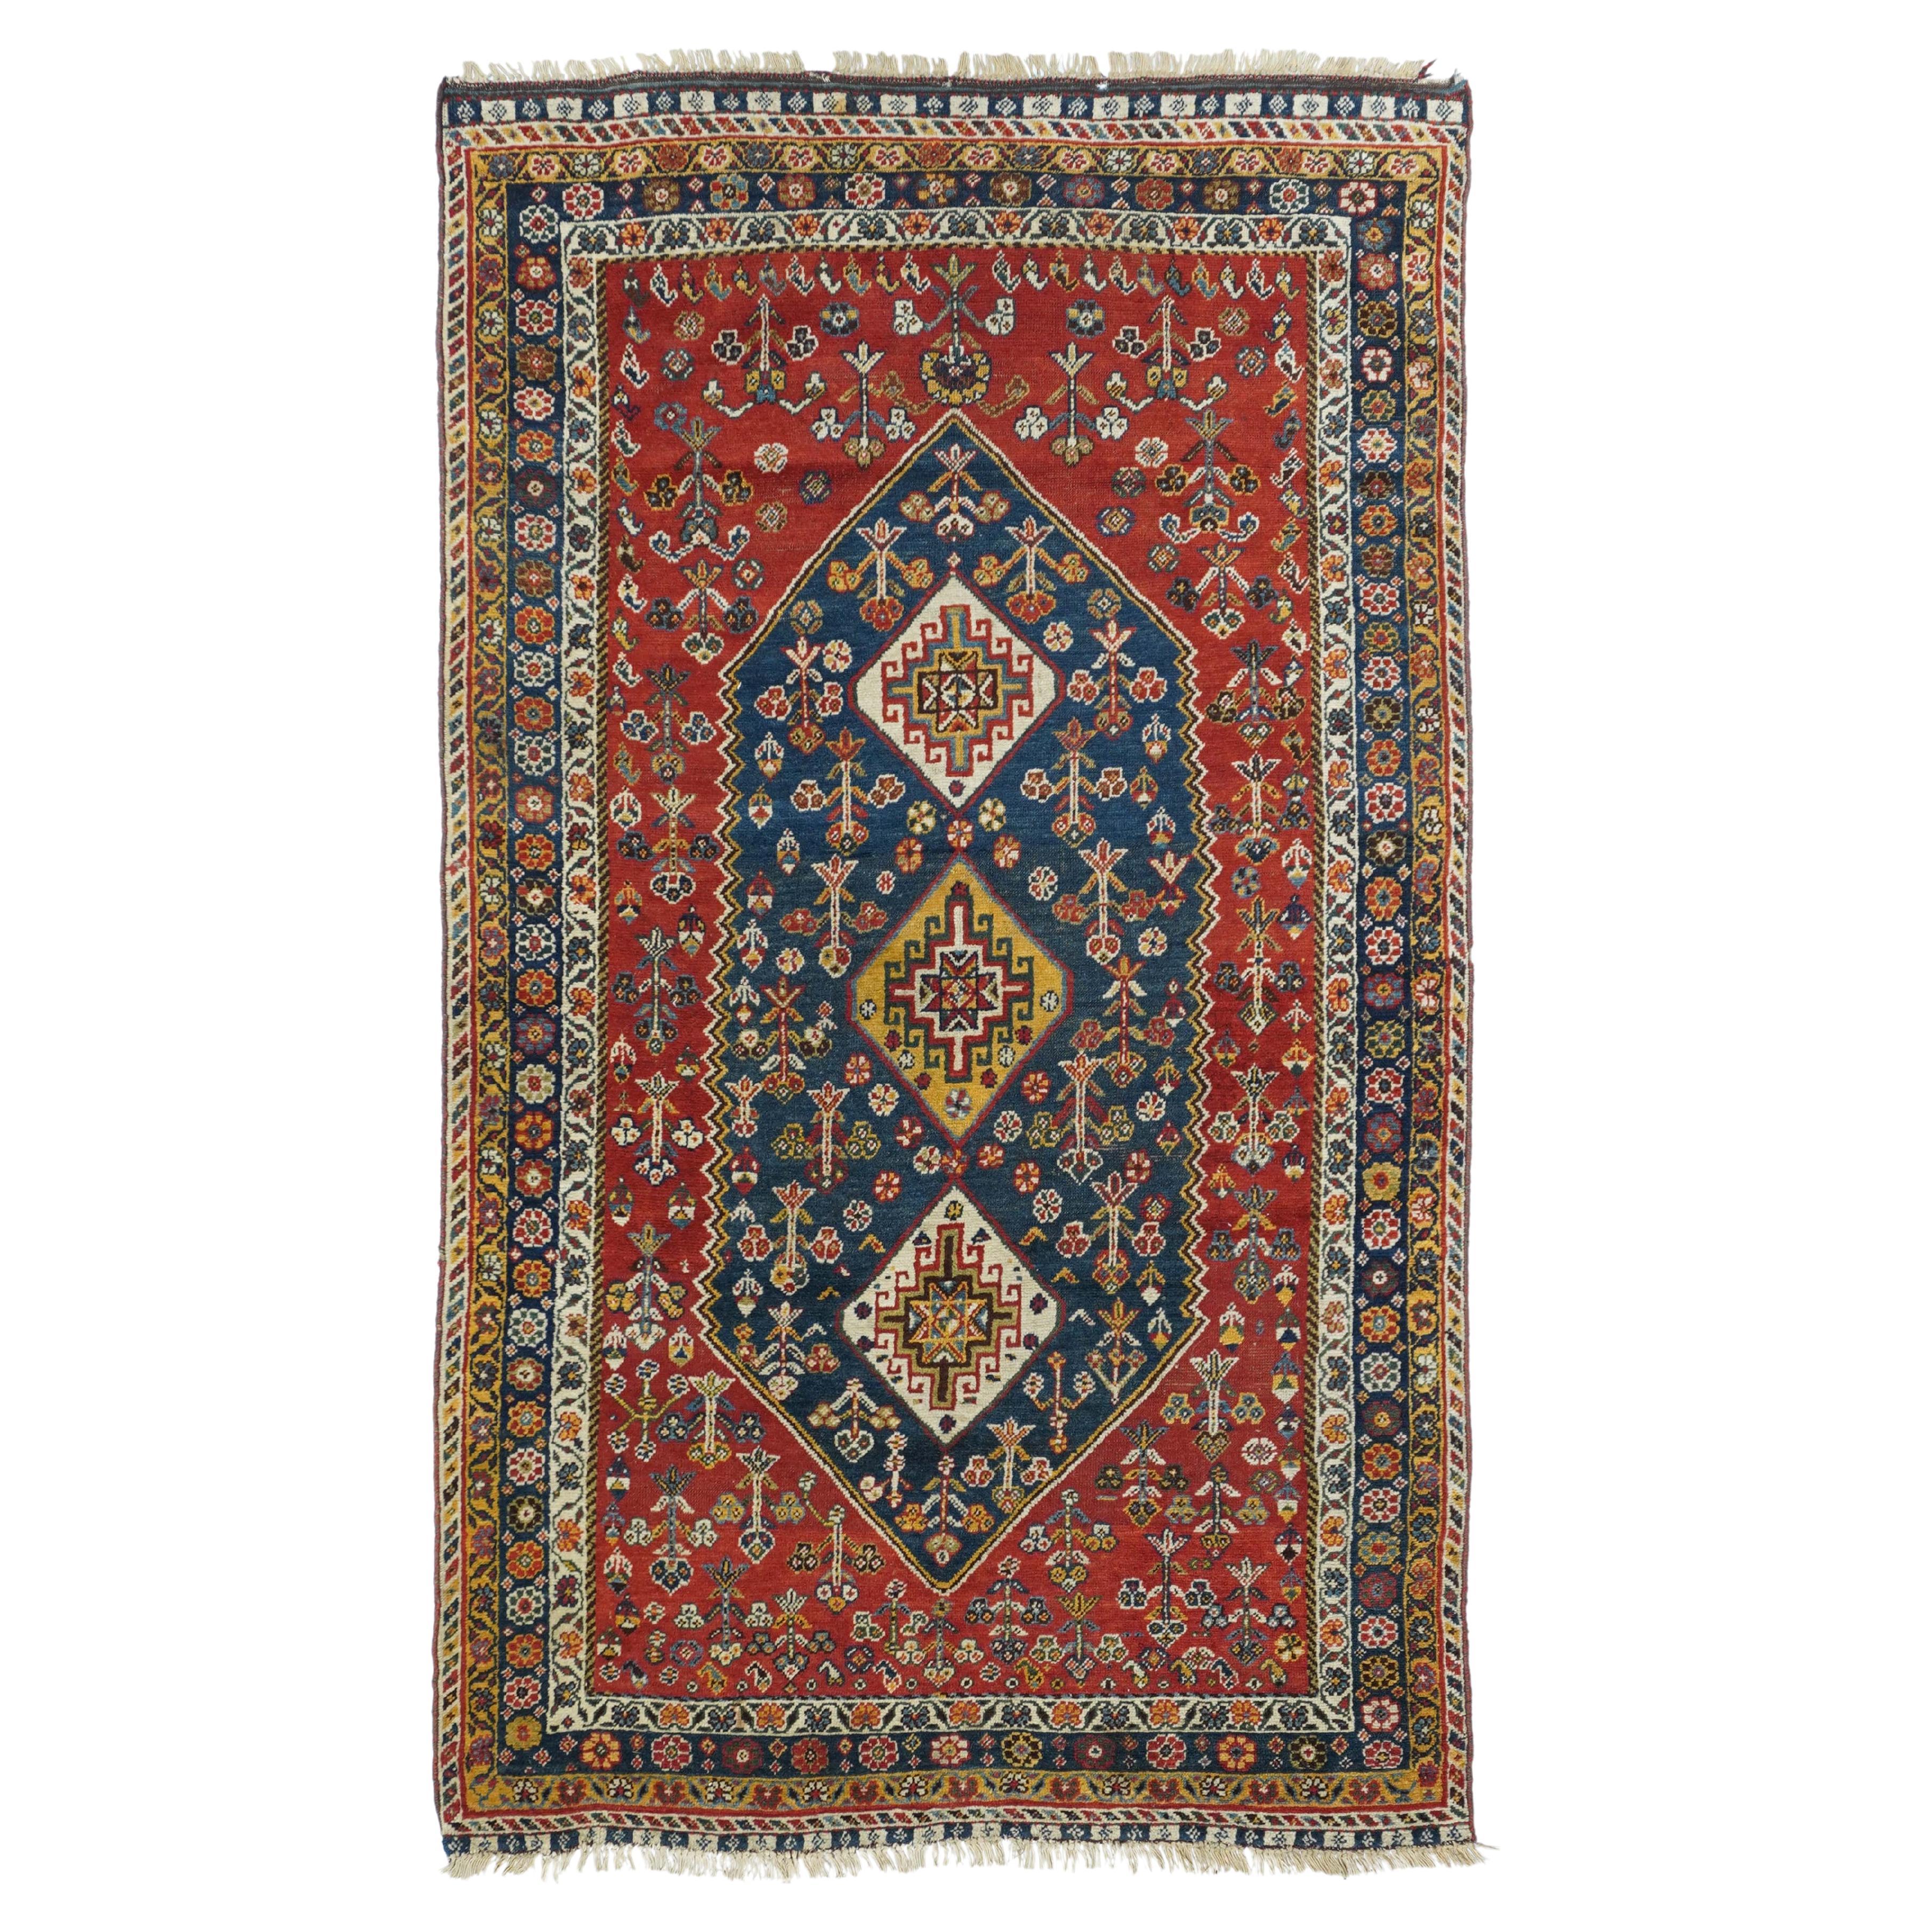 Early 1900s Rugs and Carpets